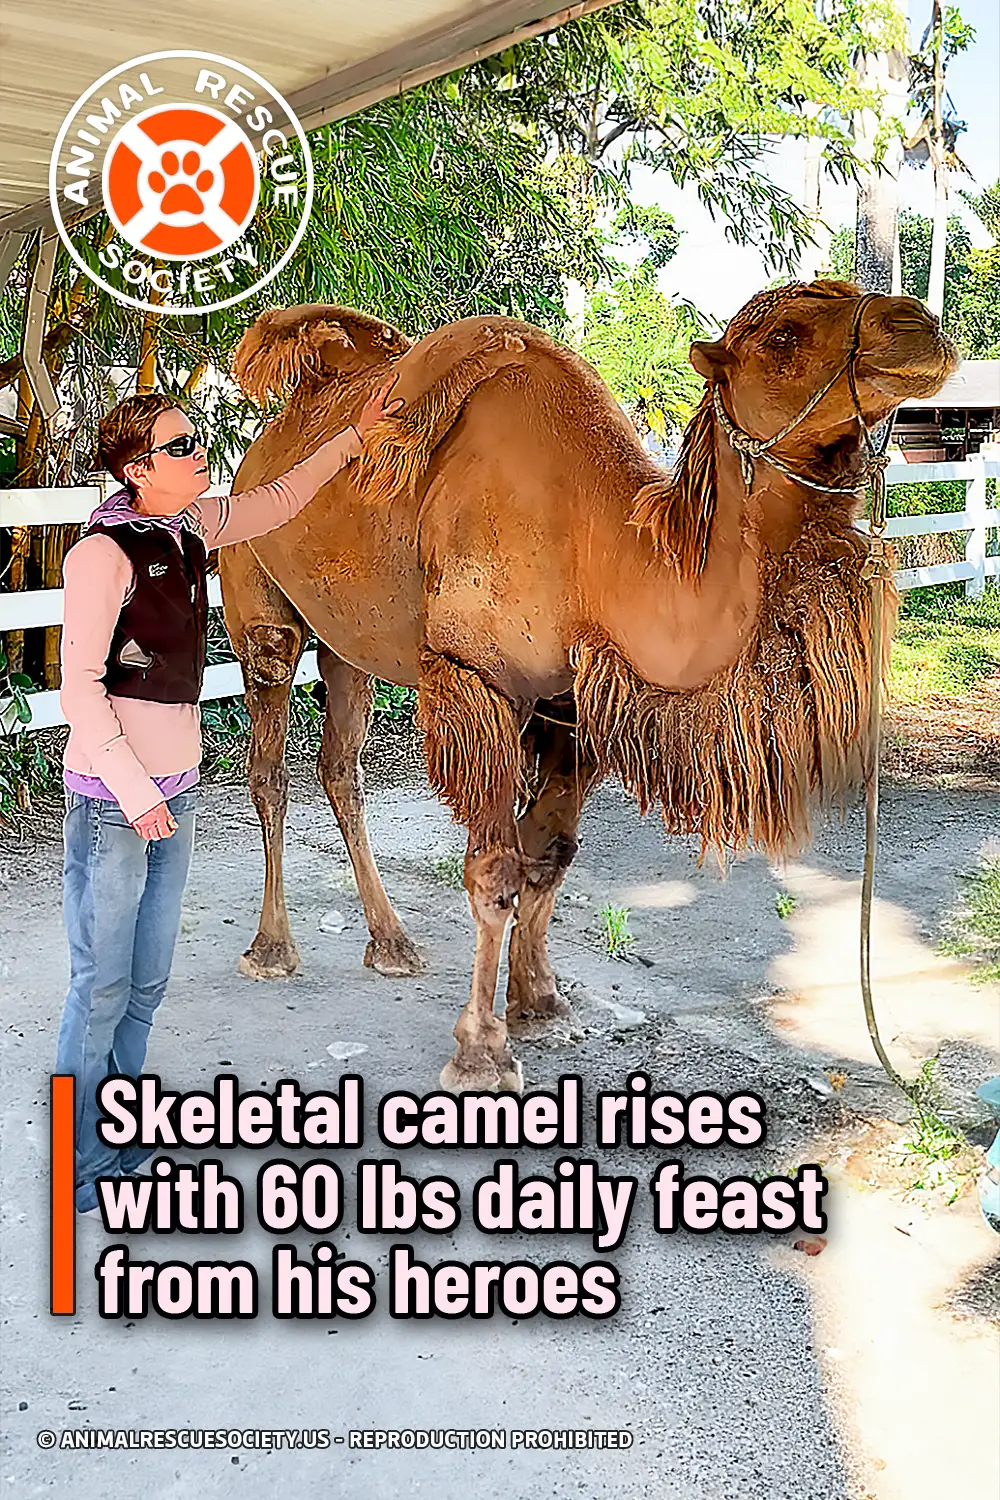 Skeletal camel rises with 60 lbs daily feast from his heroes